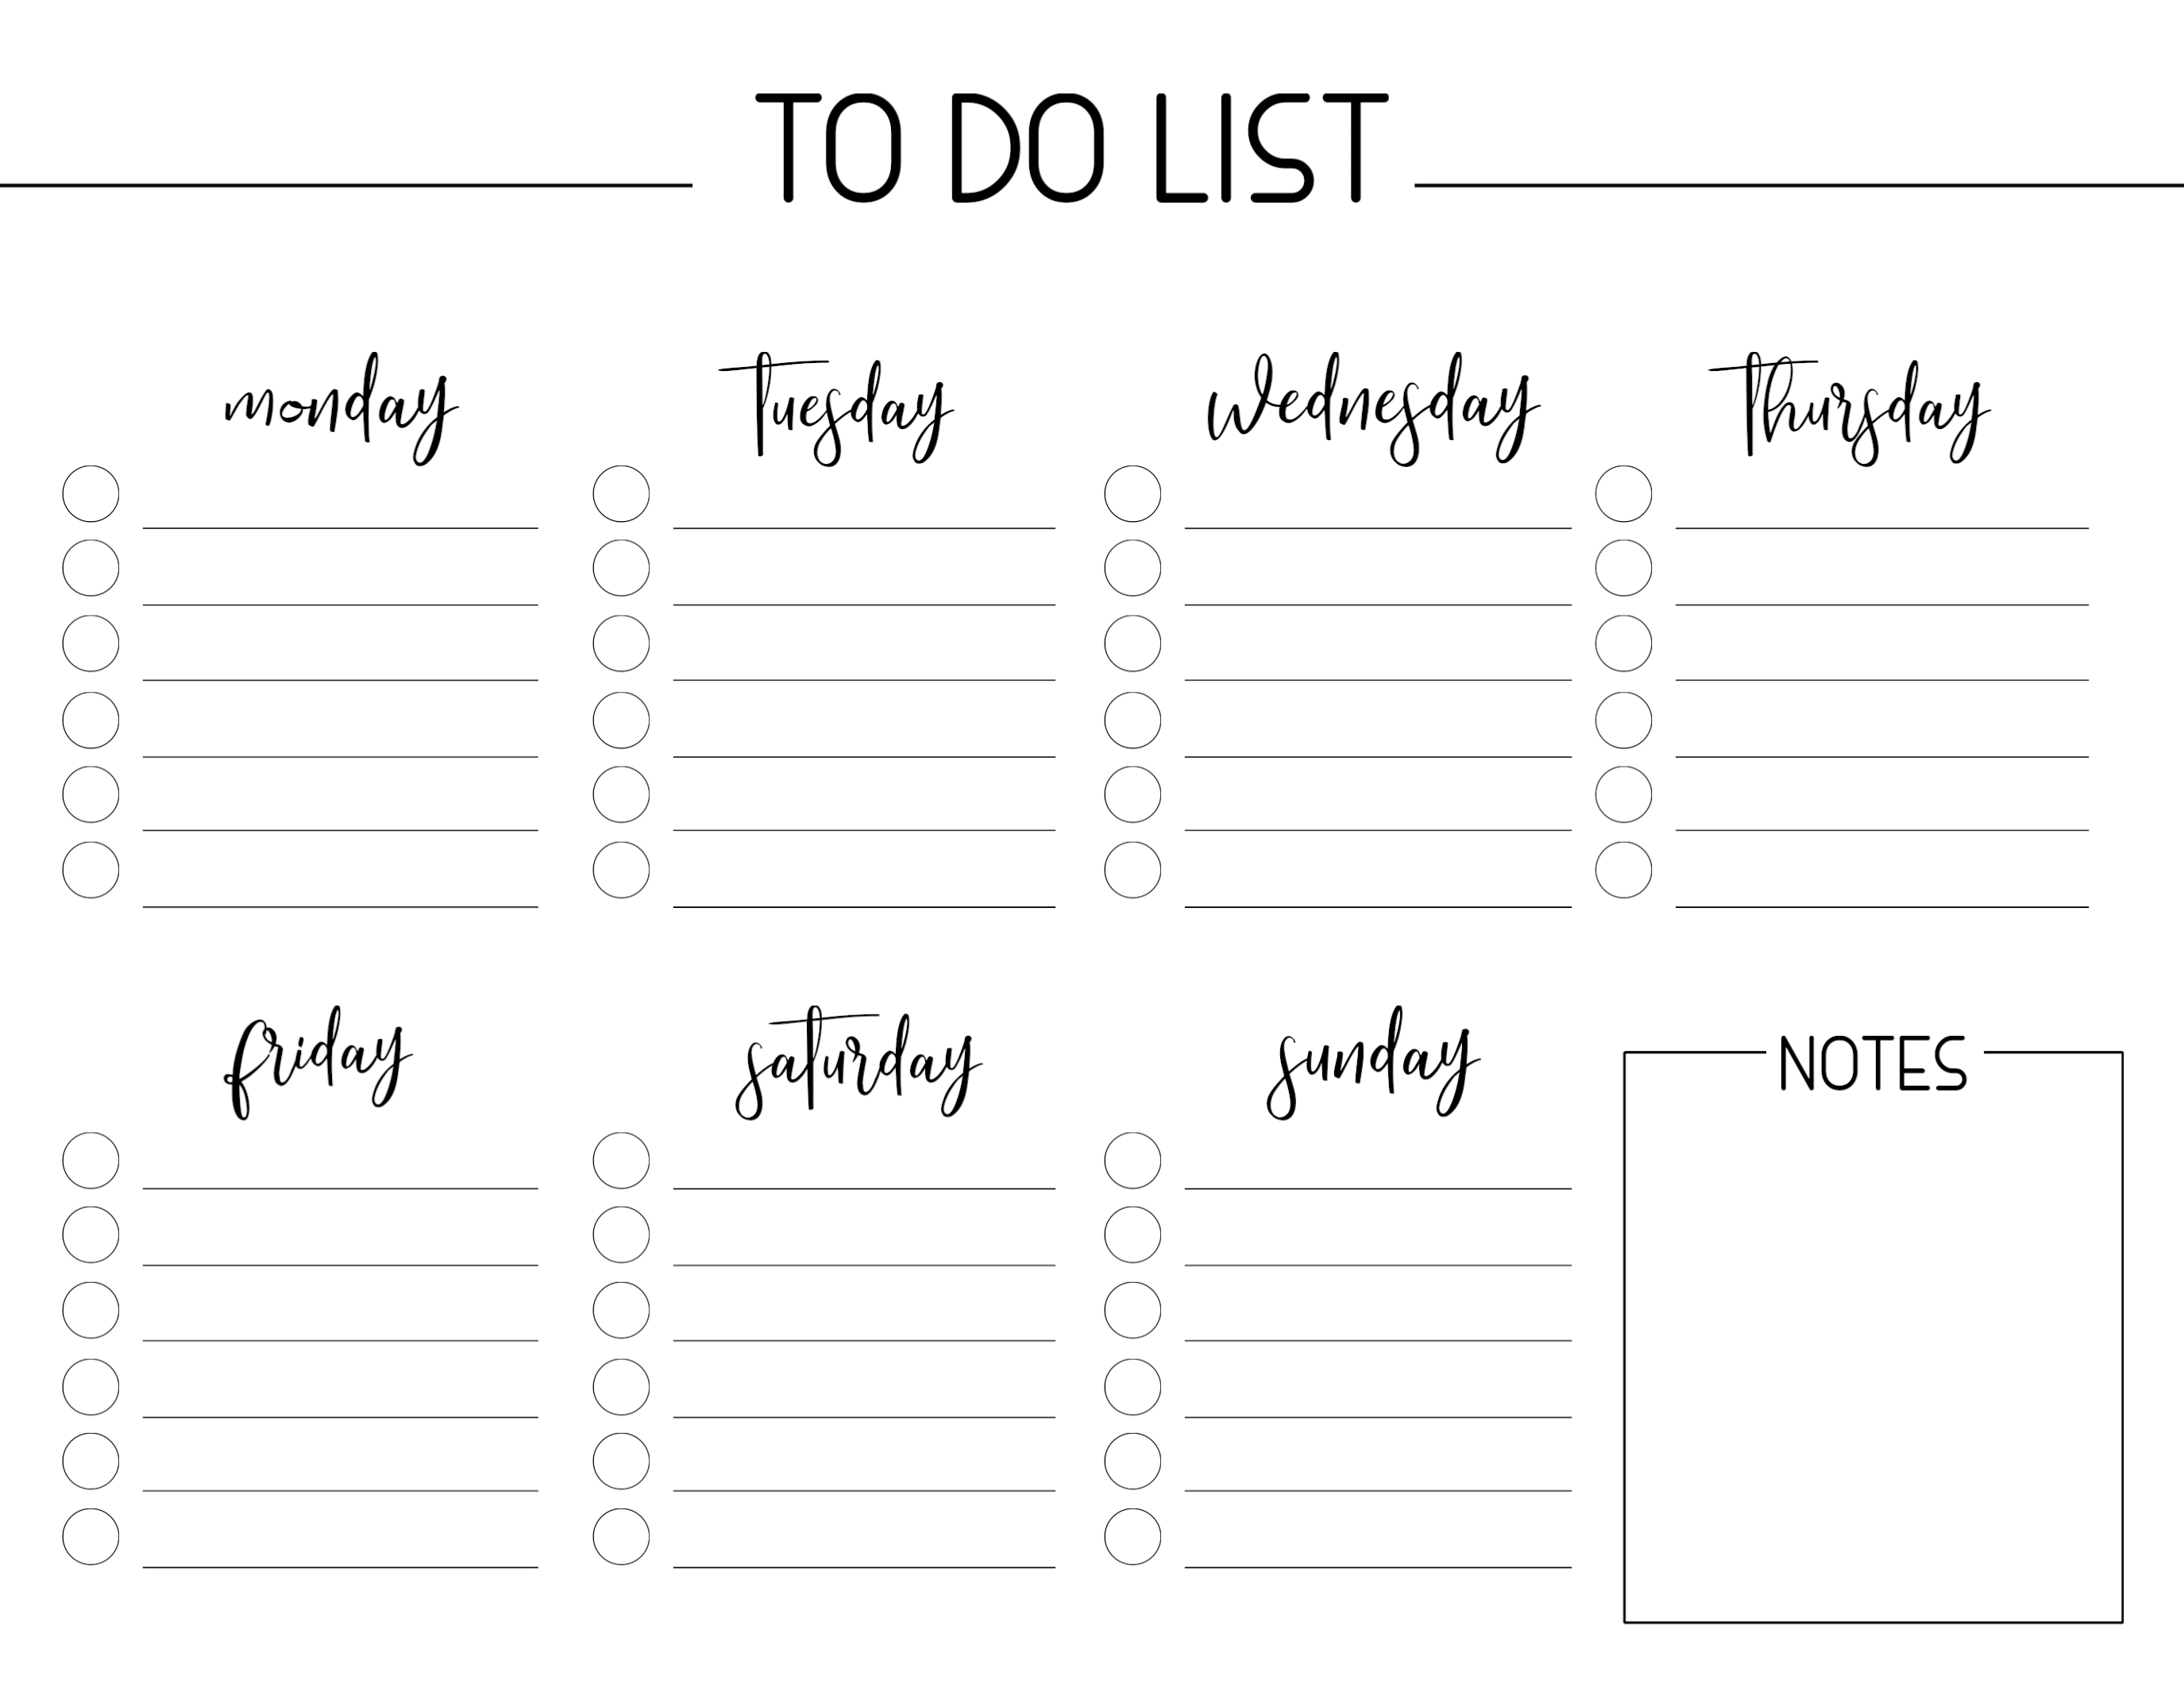 weekly-to-do-list-free-printable-printable-free-templates-download